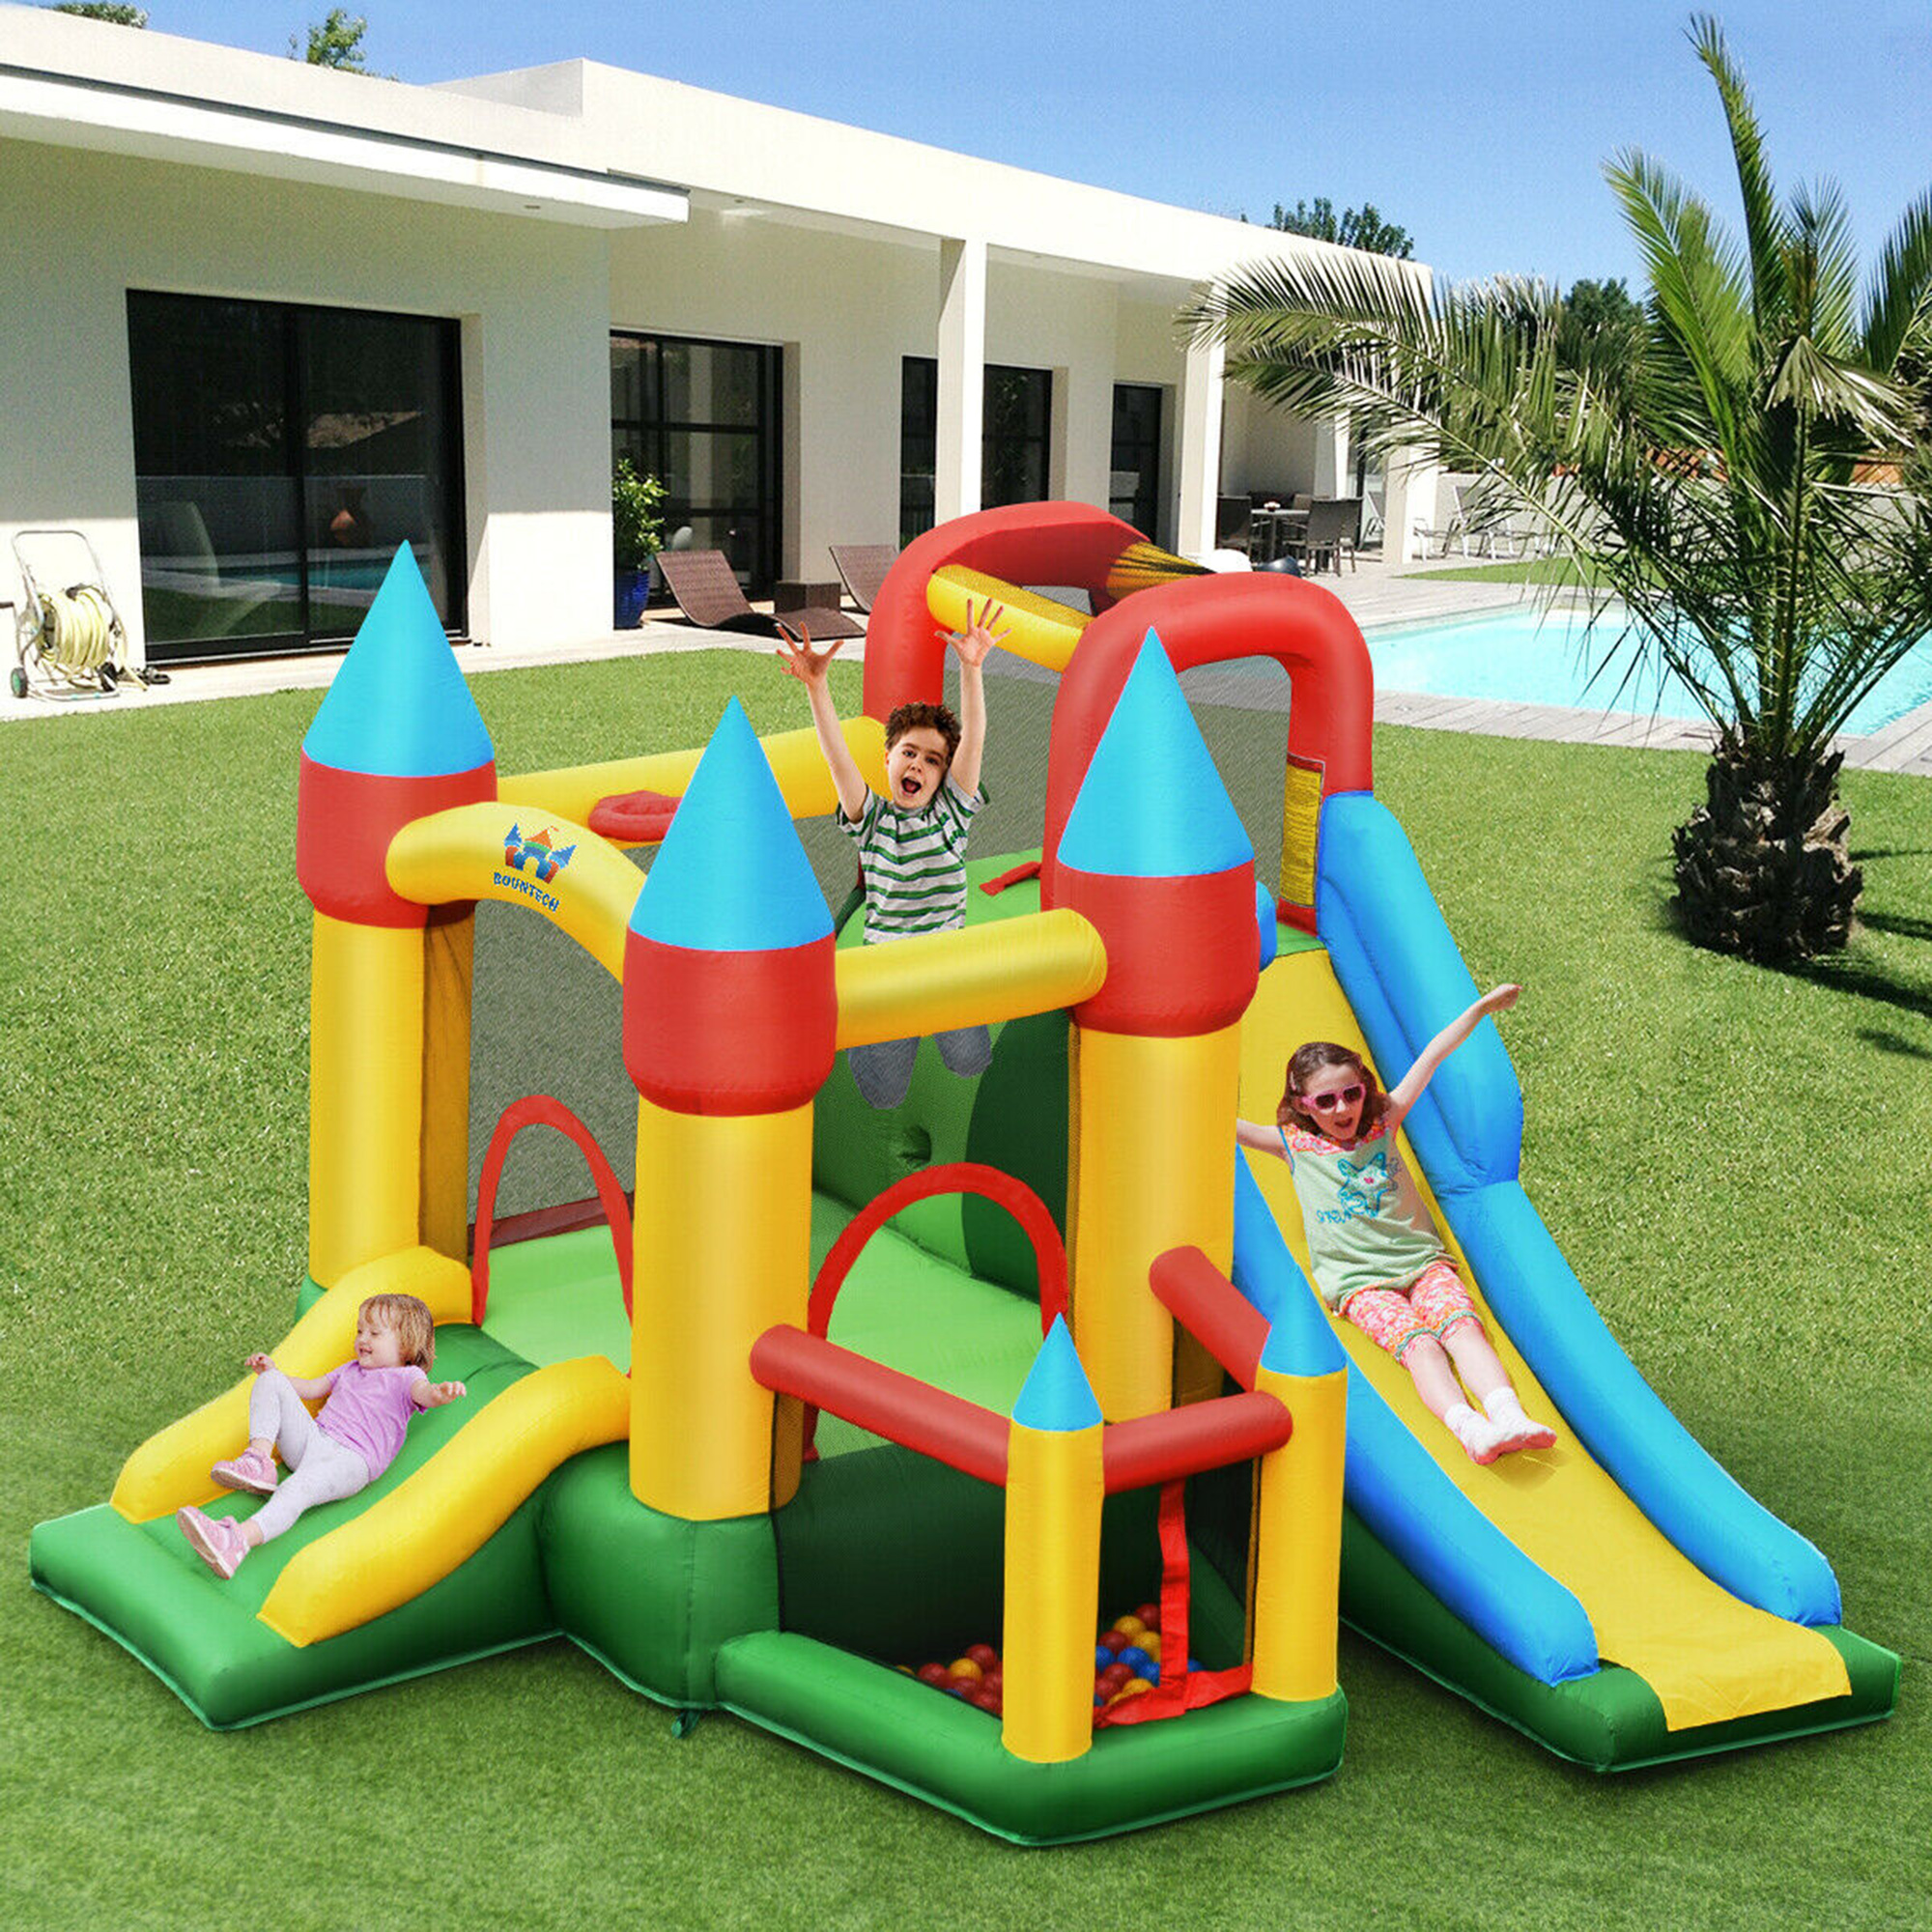 Gymax Kids Inflatable Bounce House Jumping Dual Slide Bouncer Castle W/ 780W Blower - image 4 of 10